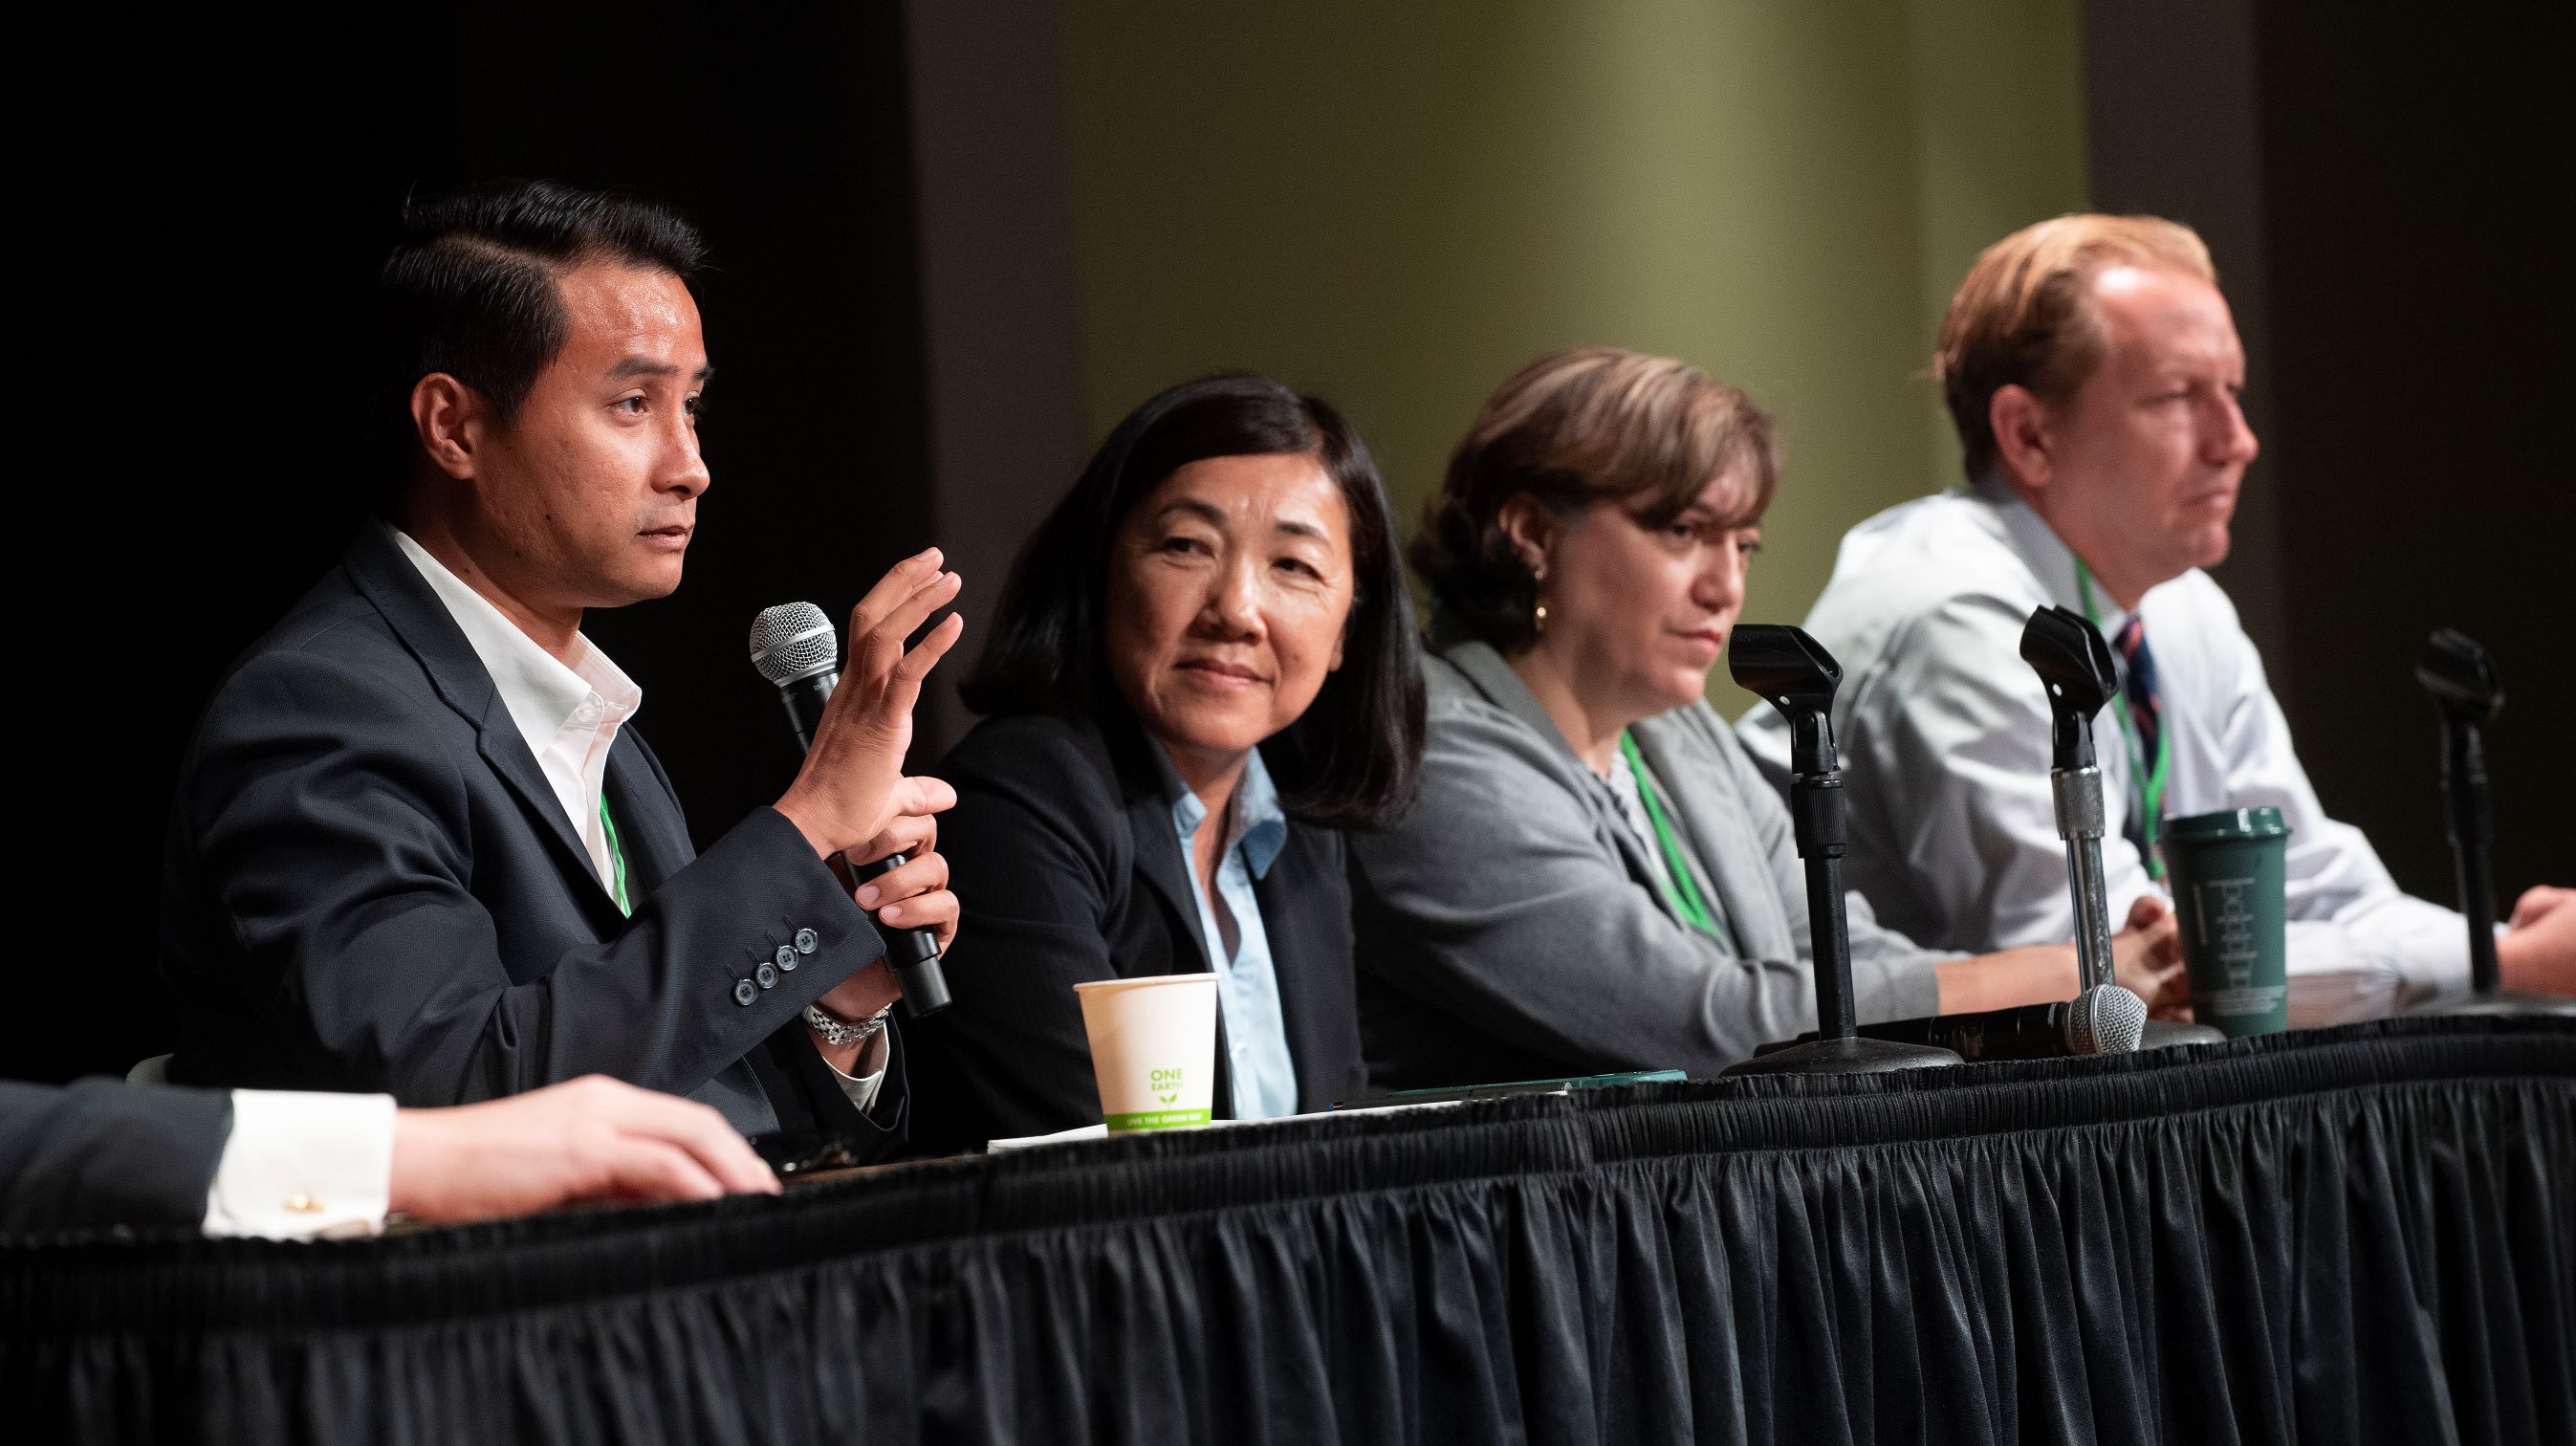 4 adults speak at a panel discussion